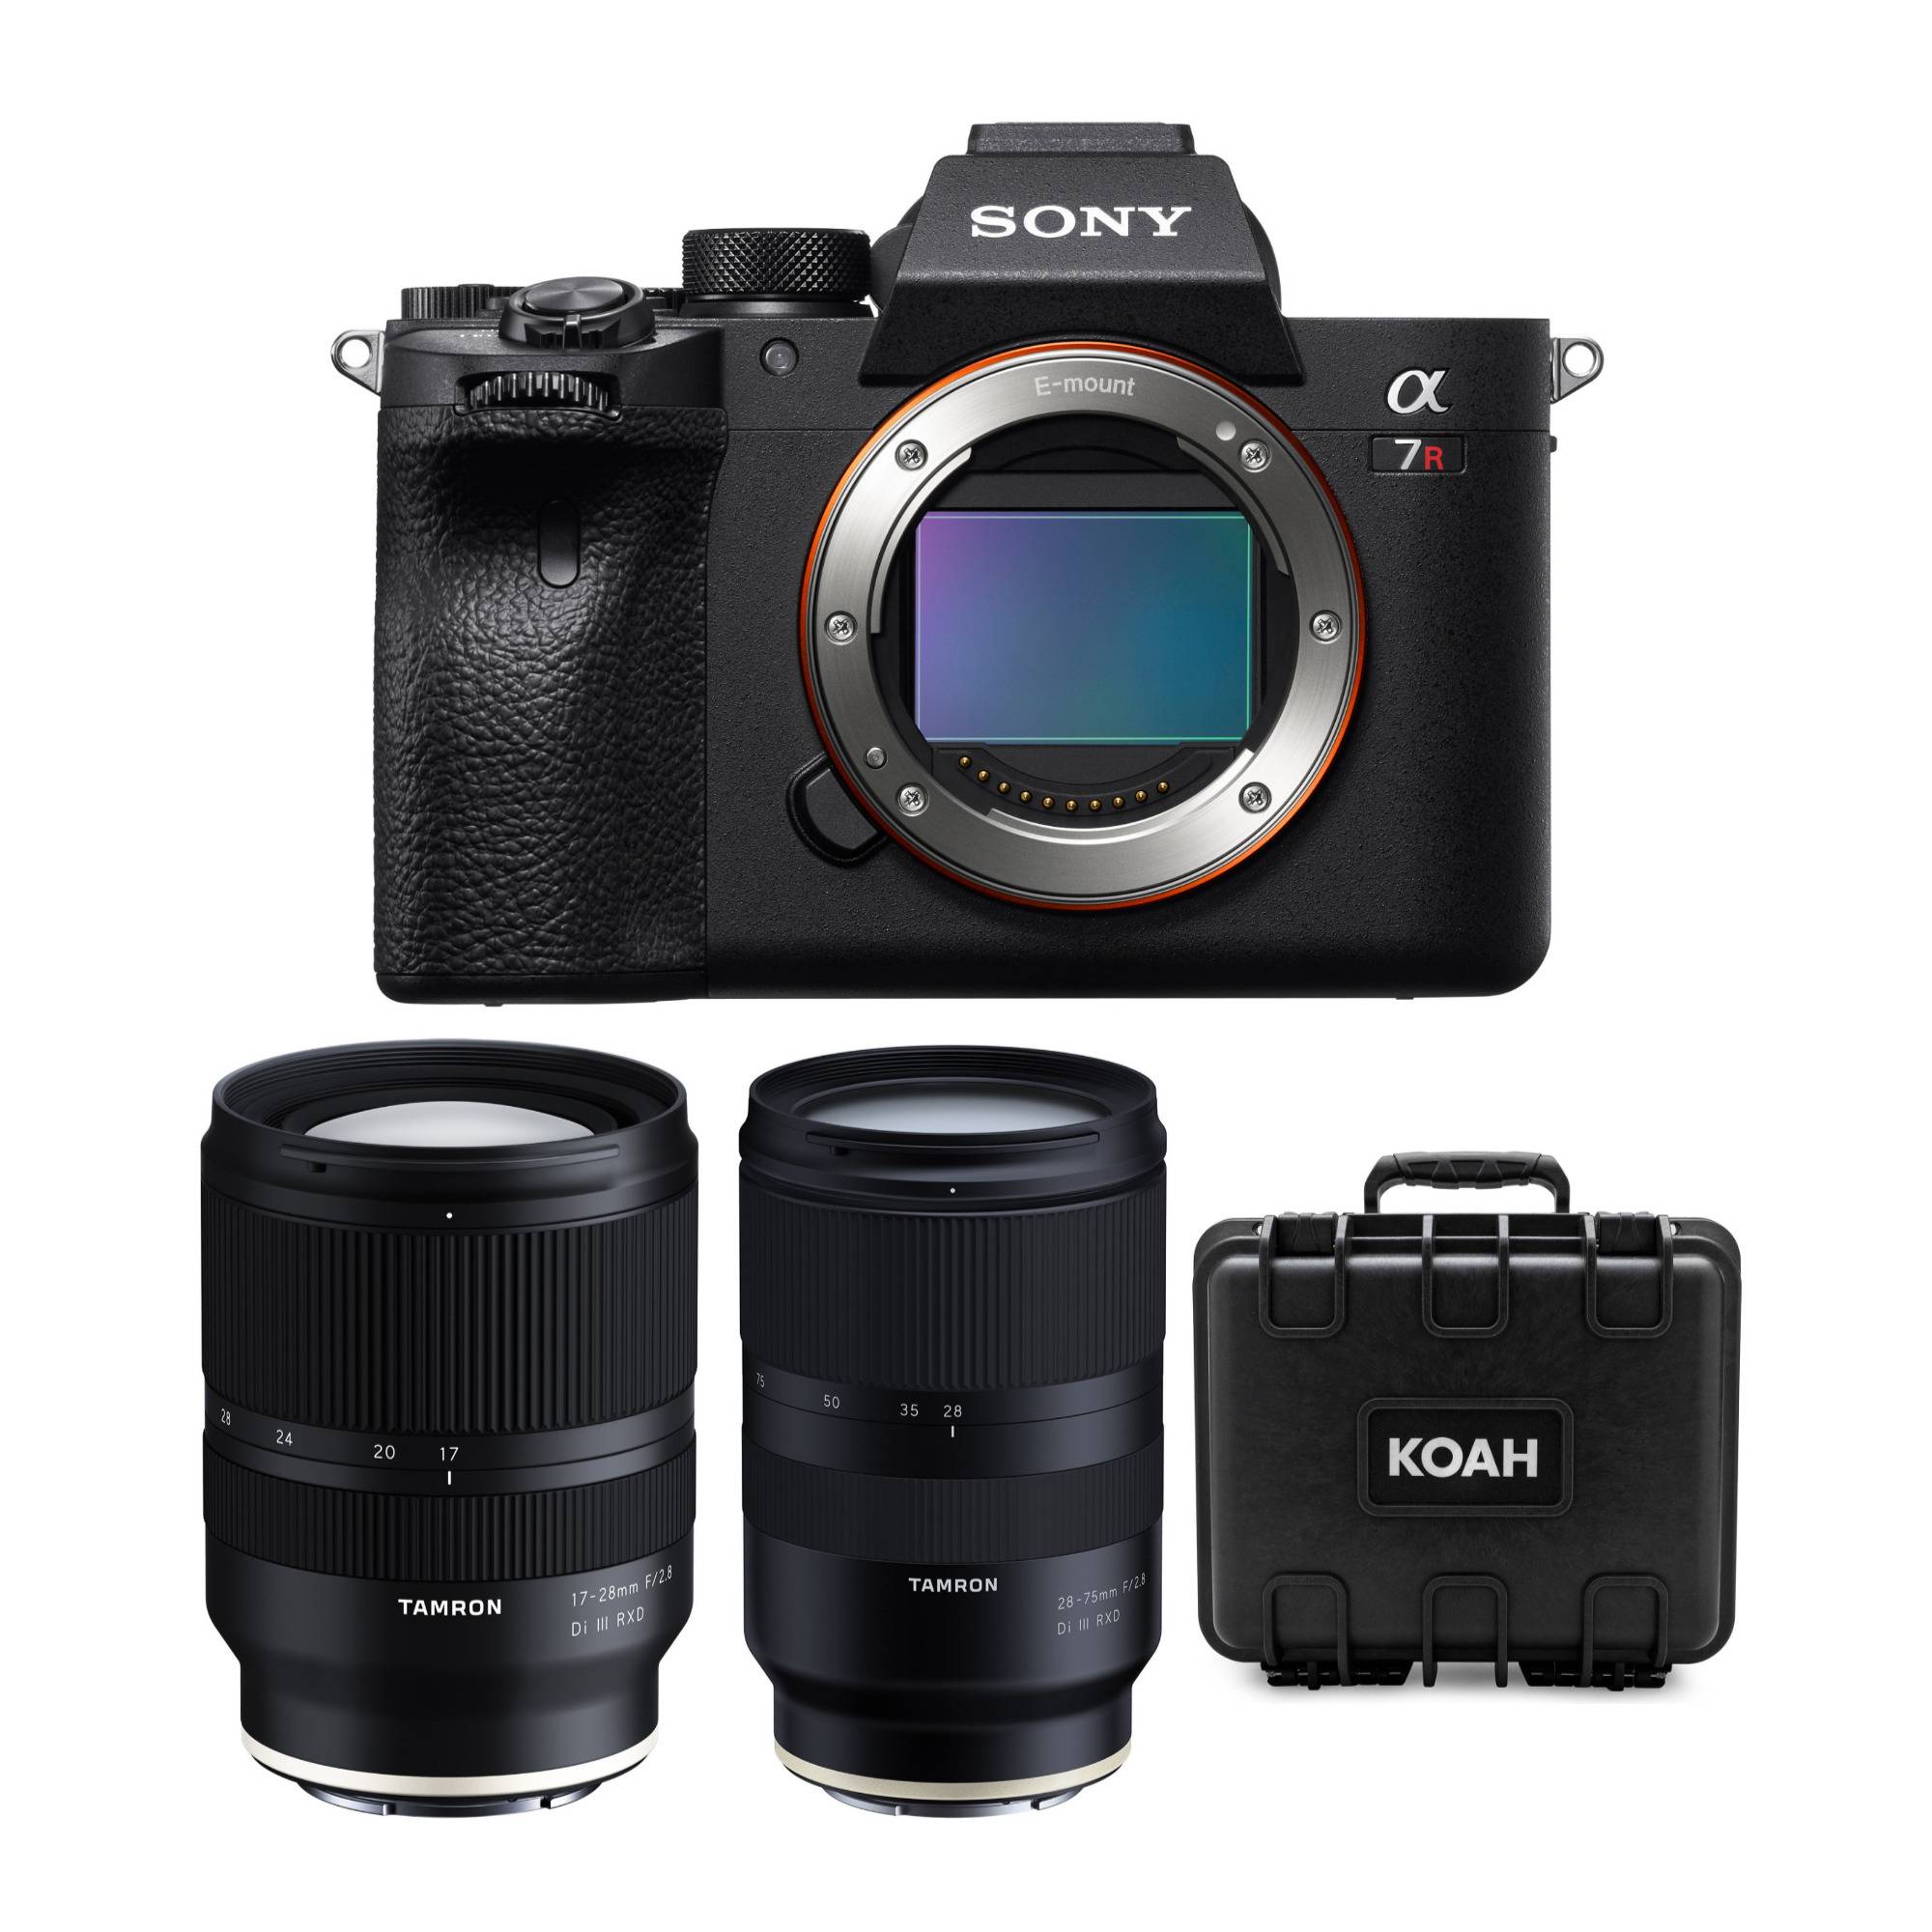 Sony a7R IV A 61MP Full-Frame Mirrorless Camera with Tamron 17-28mm and 28-75mm Lens Bundle